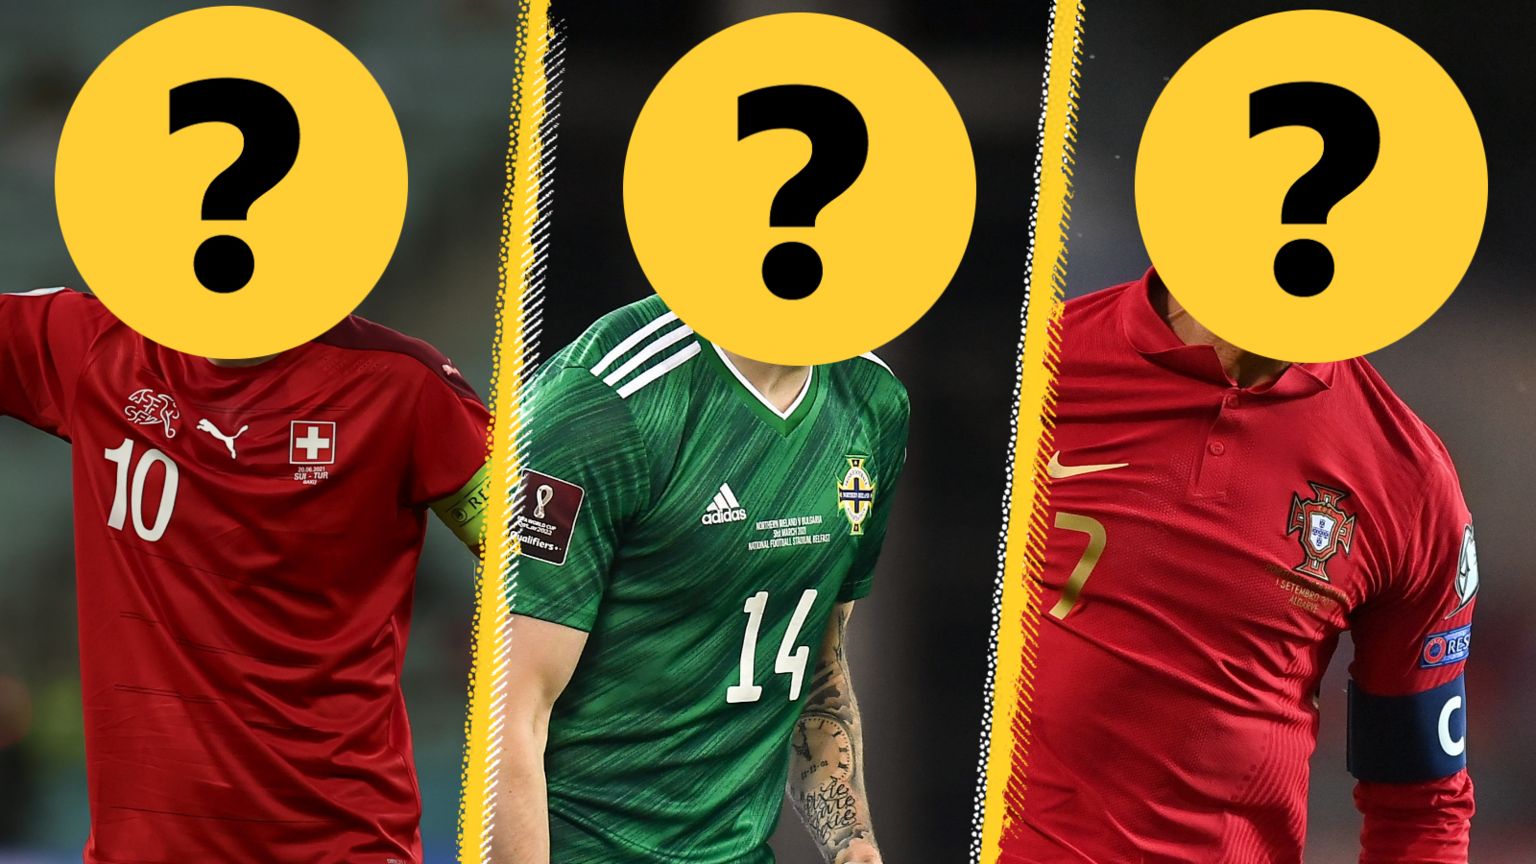 Split picture graphic - most international caps quiz. Three players with their faces covered by question marks.